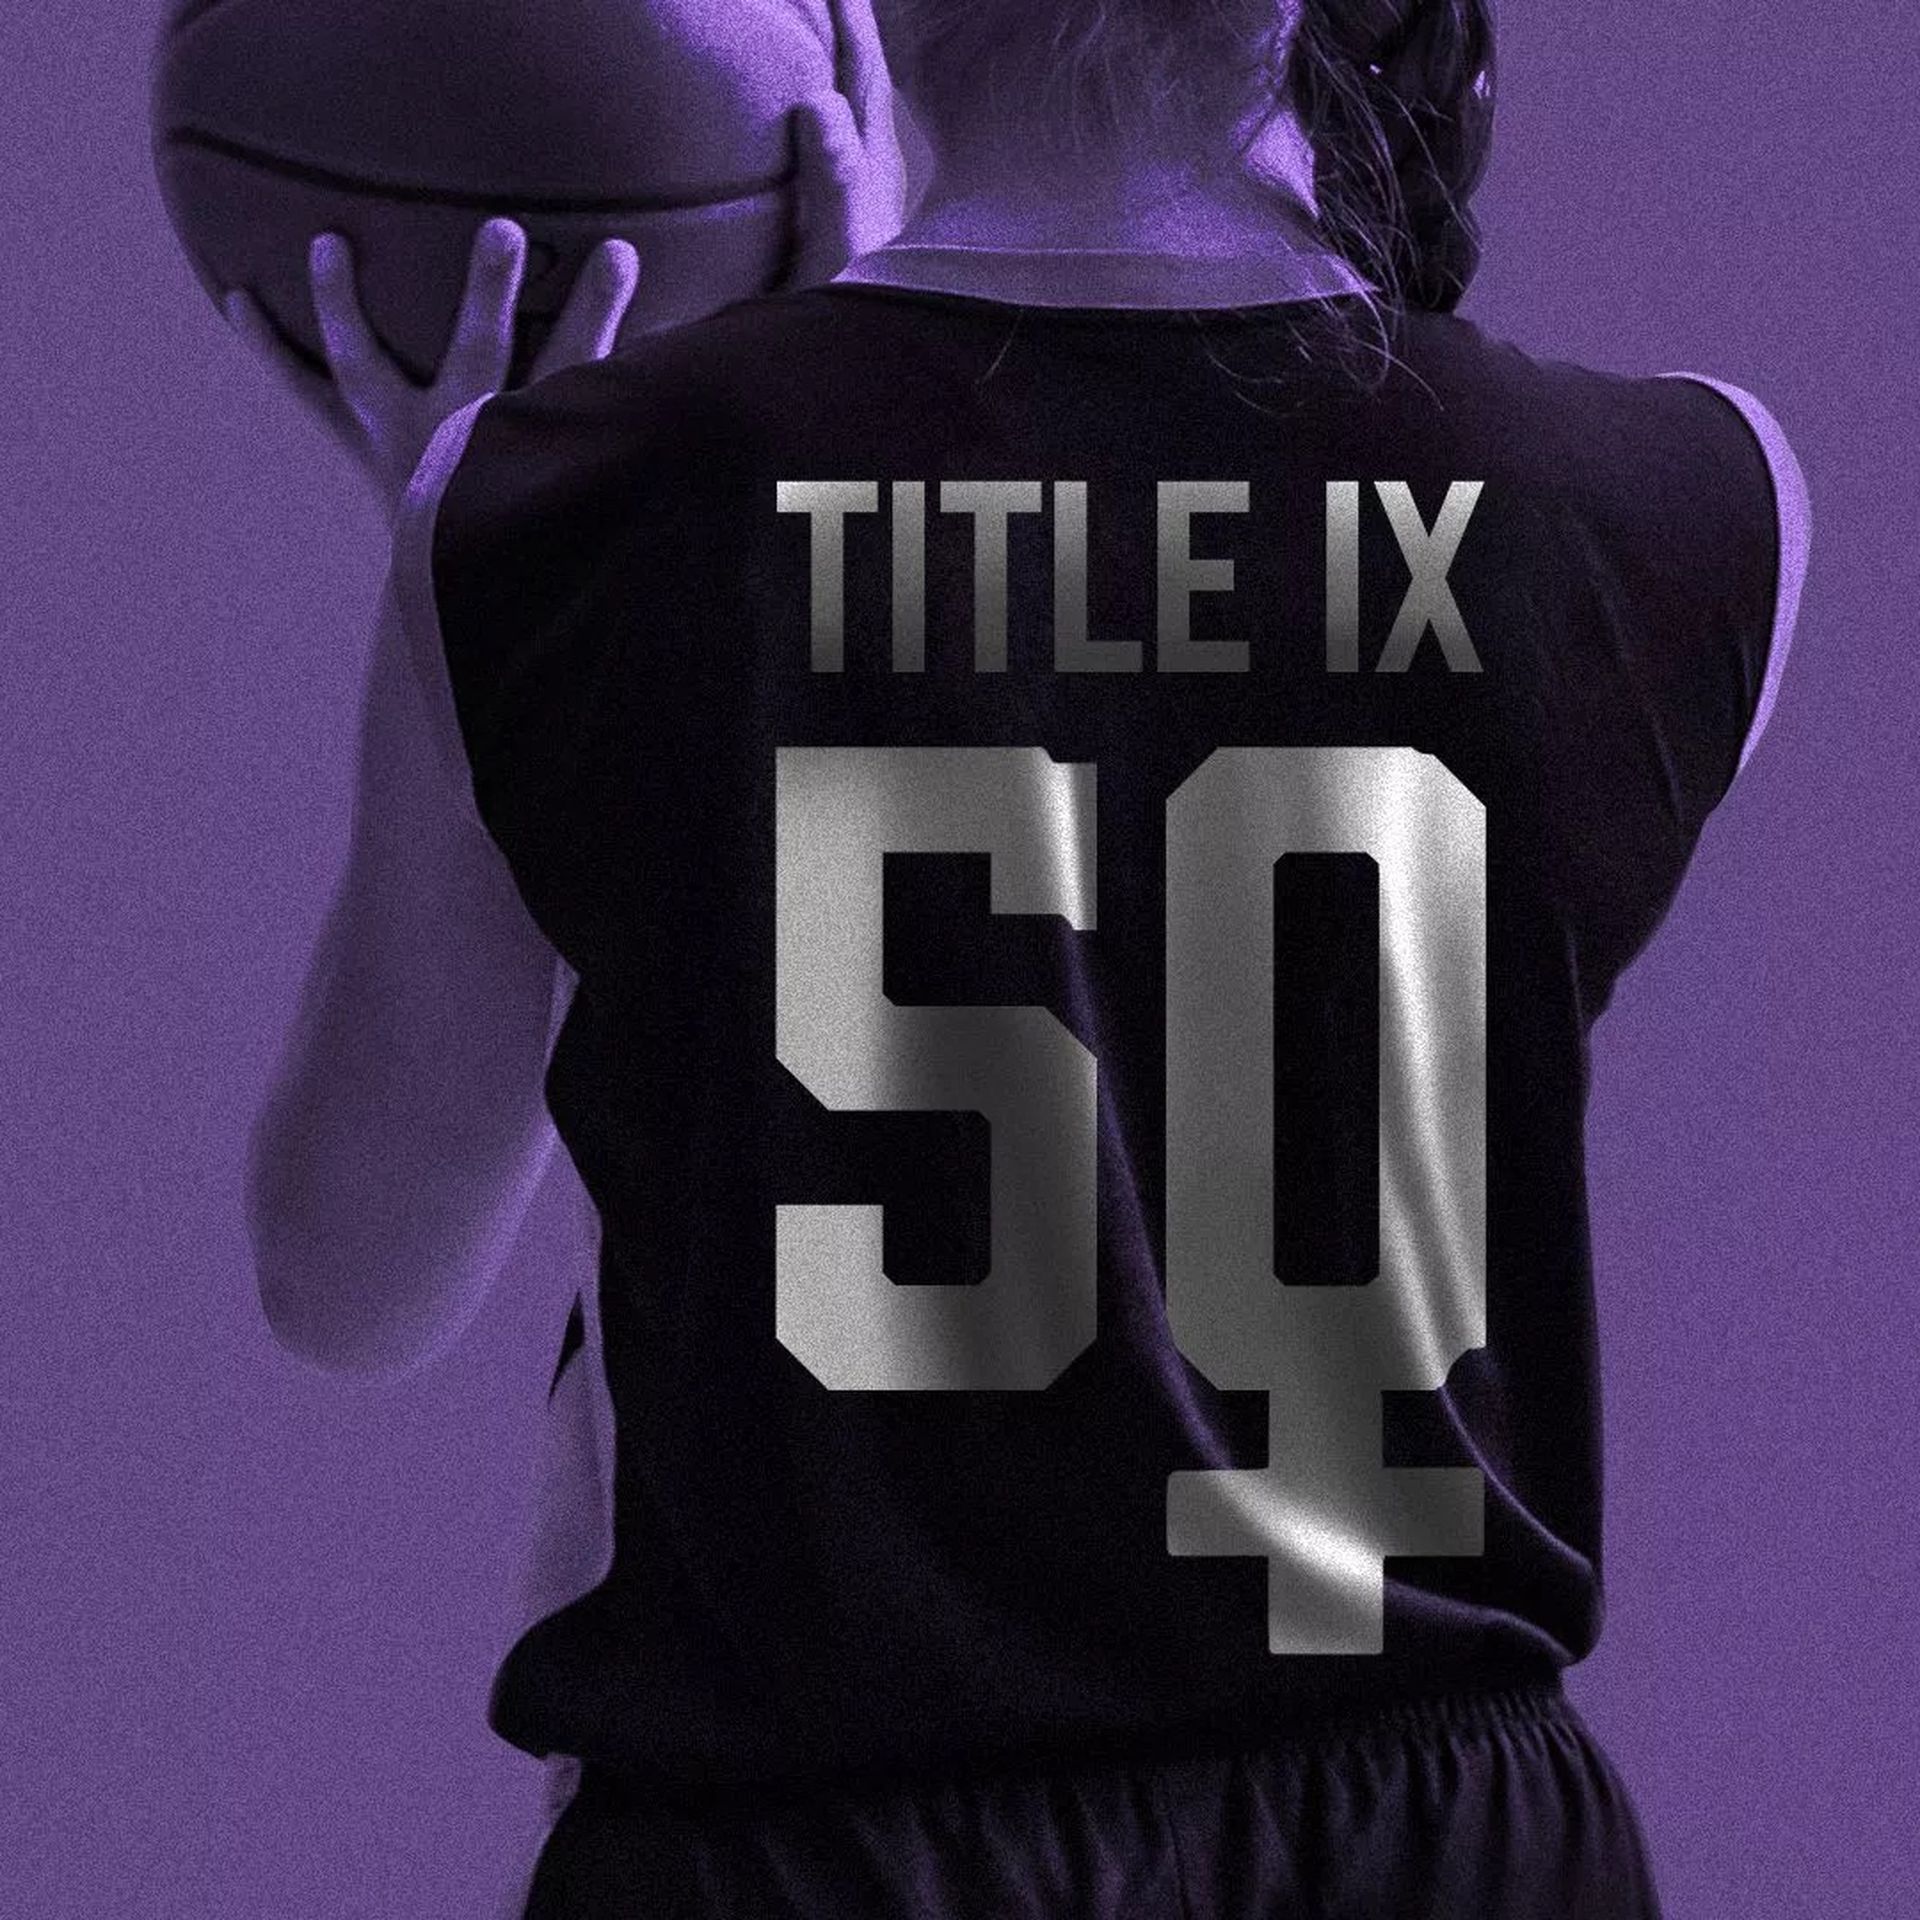 A basketball player with "title ix" on their jersey